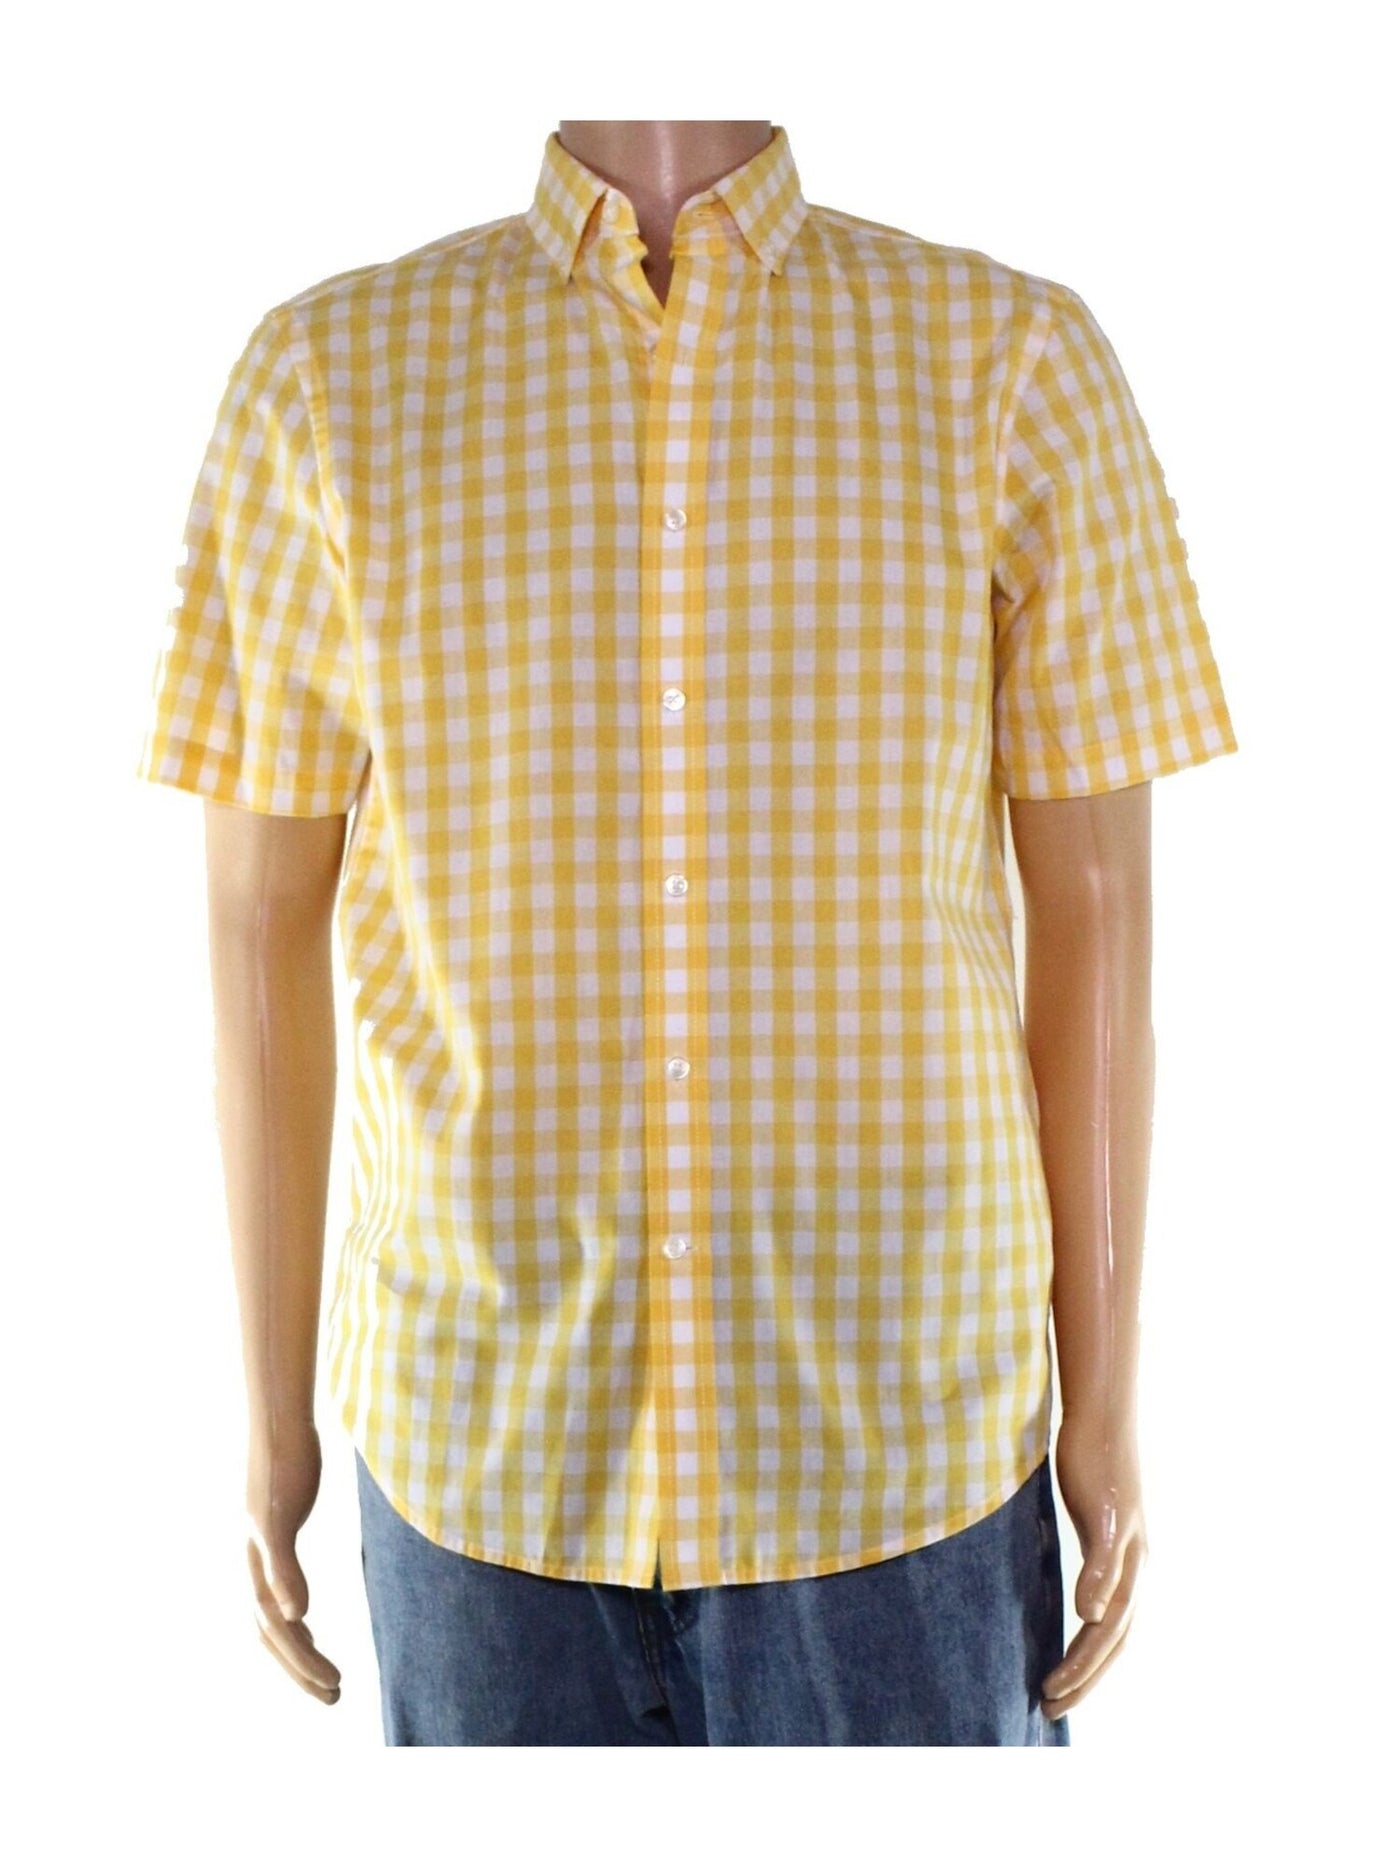 CLUBROOM Mens Yellow Multi-Check Collared Classic Fit Dress Shirt XL